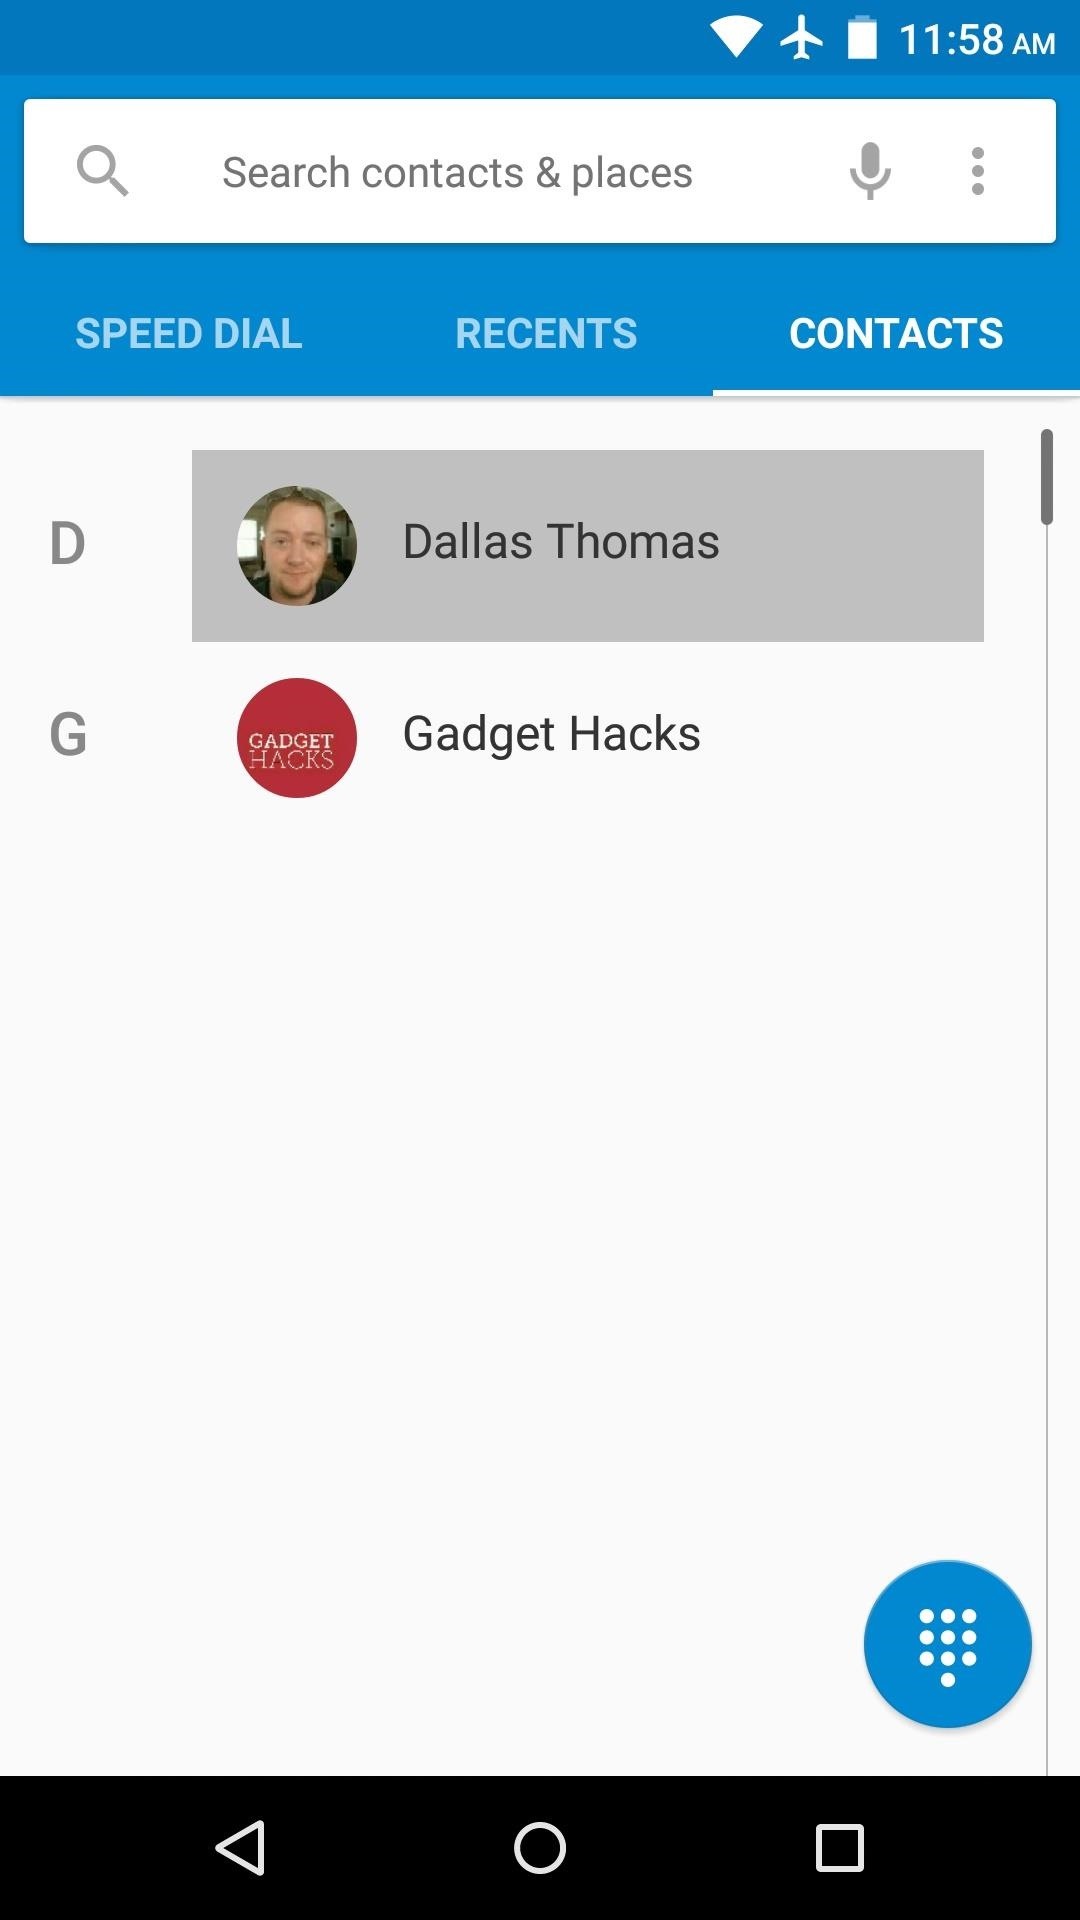 Android Basics: How to Add or Import Contacts